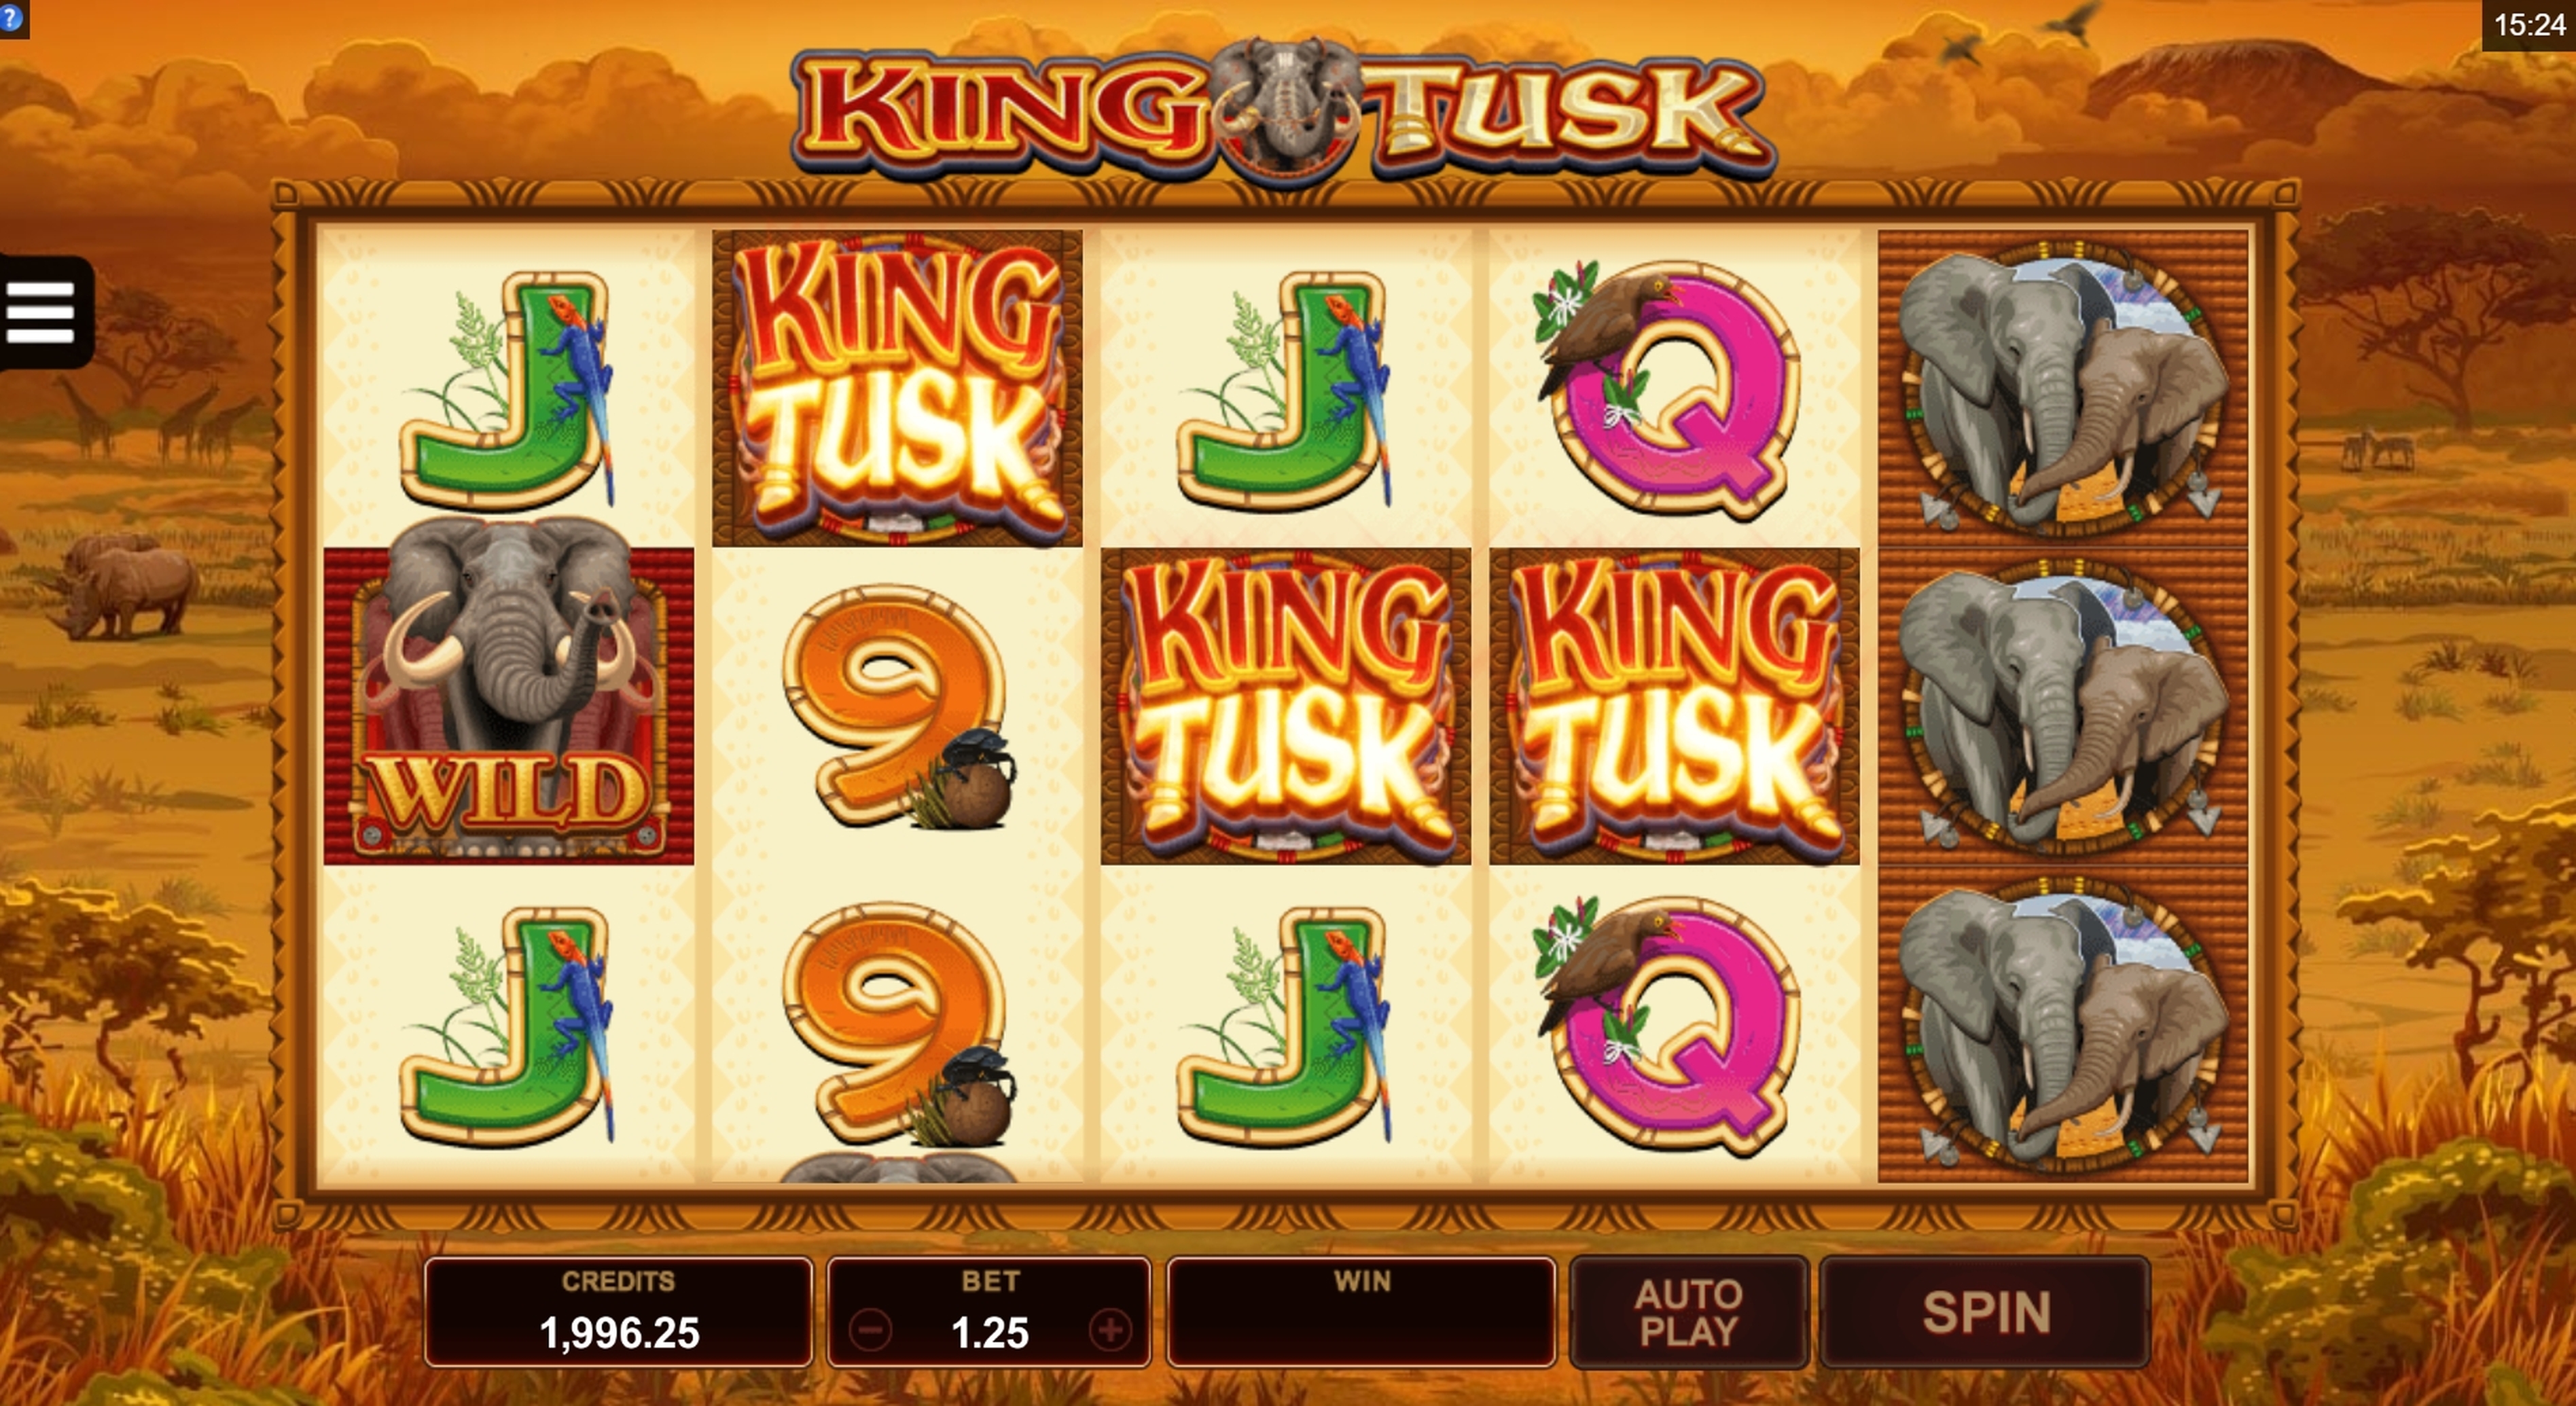 Win Money in King Tusk Free Slot Game by Microgaming